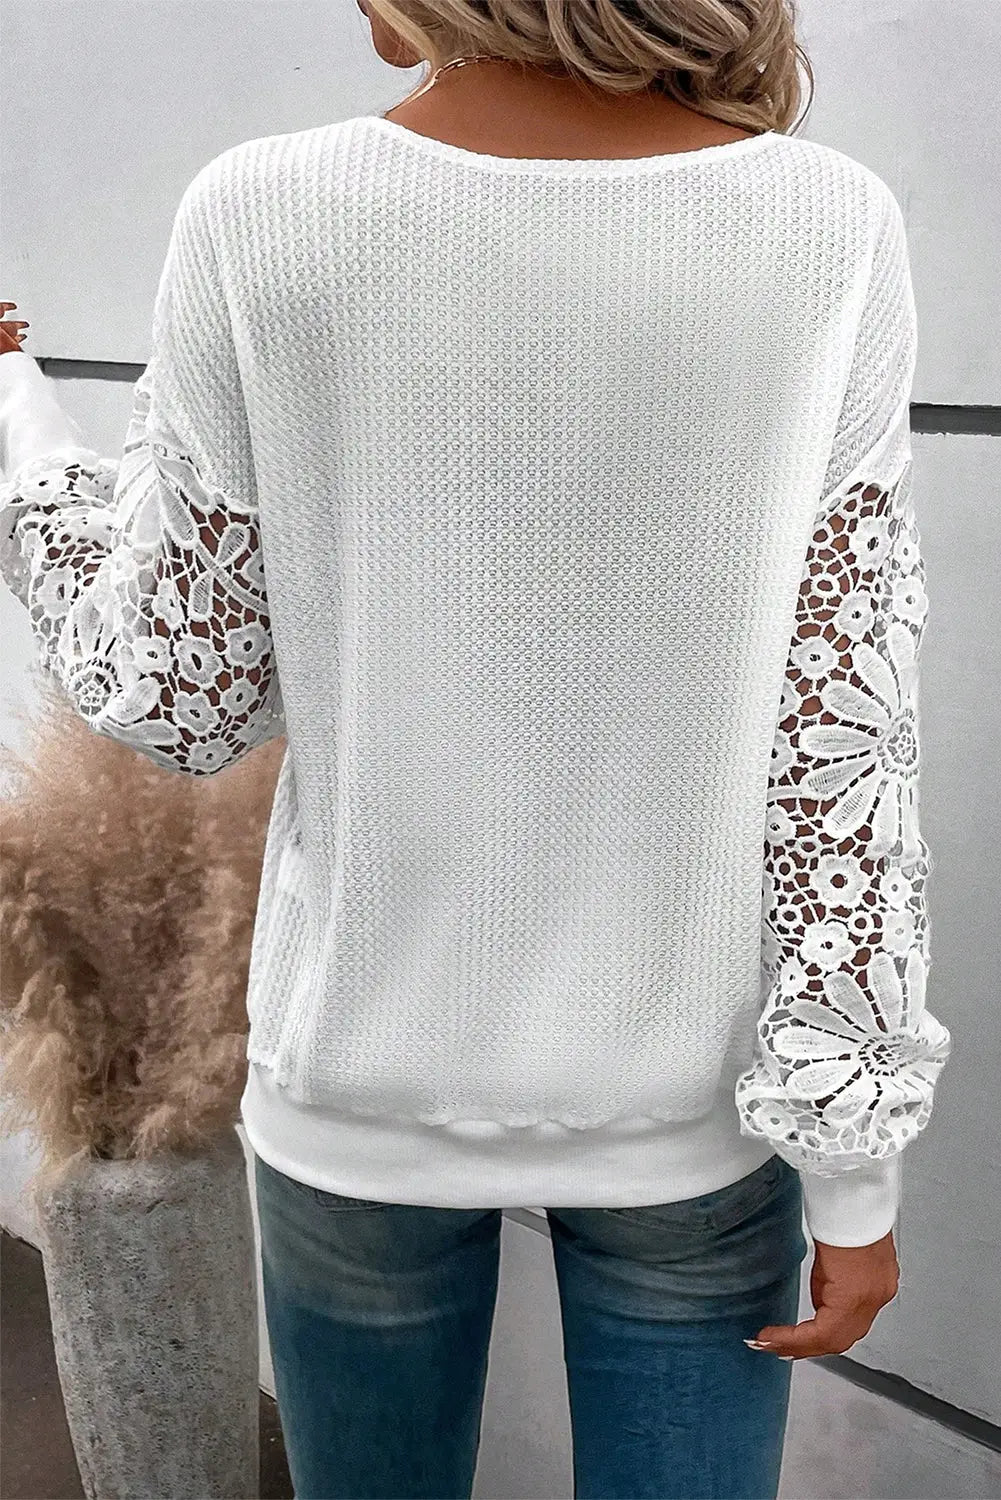 White lace splicing v neck puff sleeve top - long tops